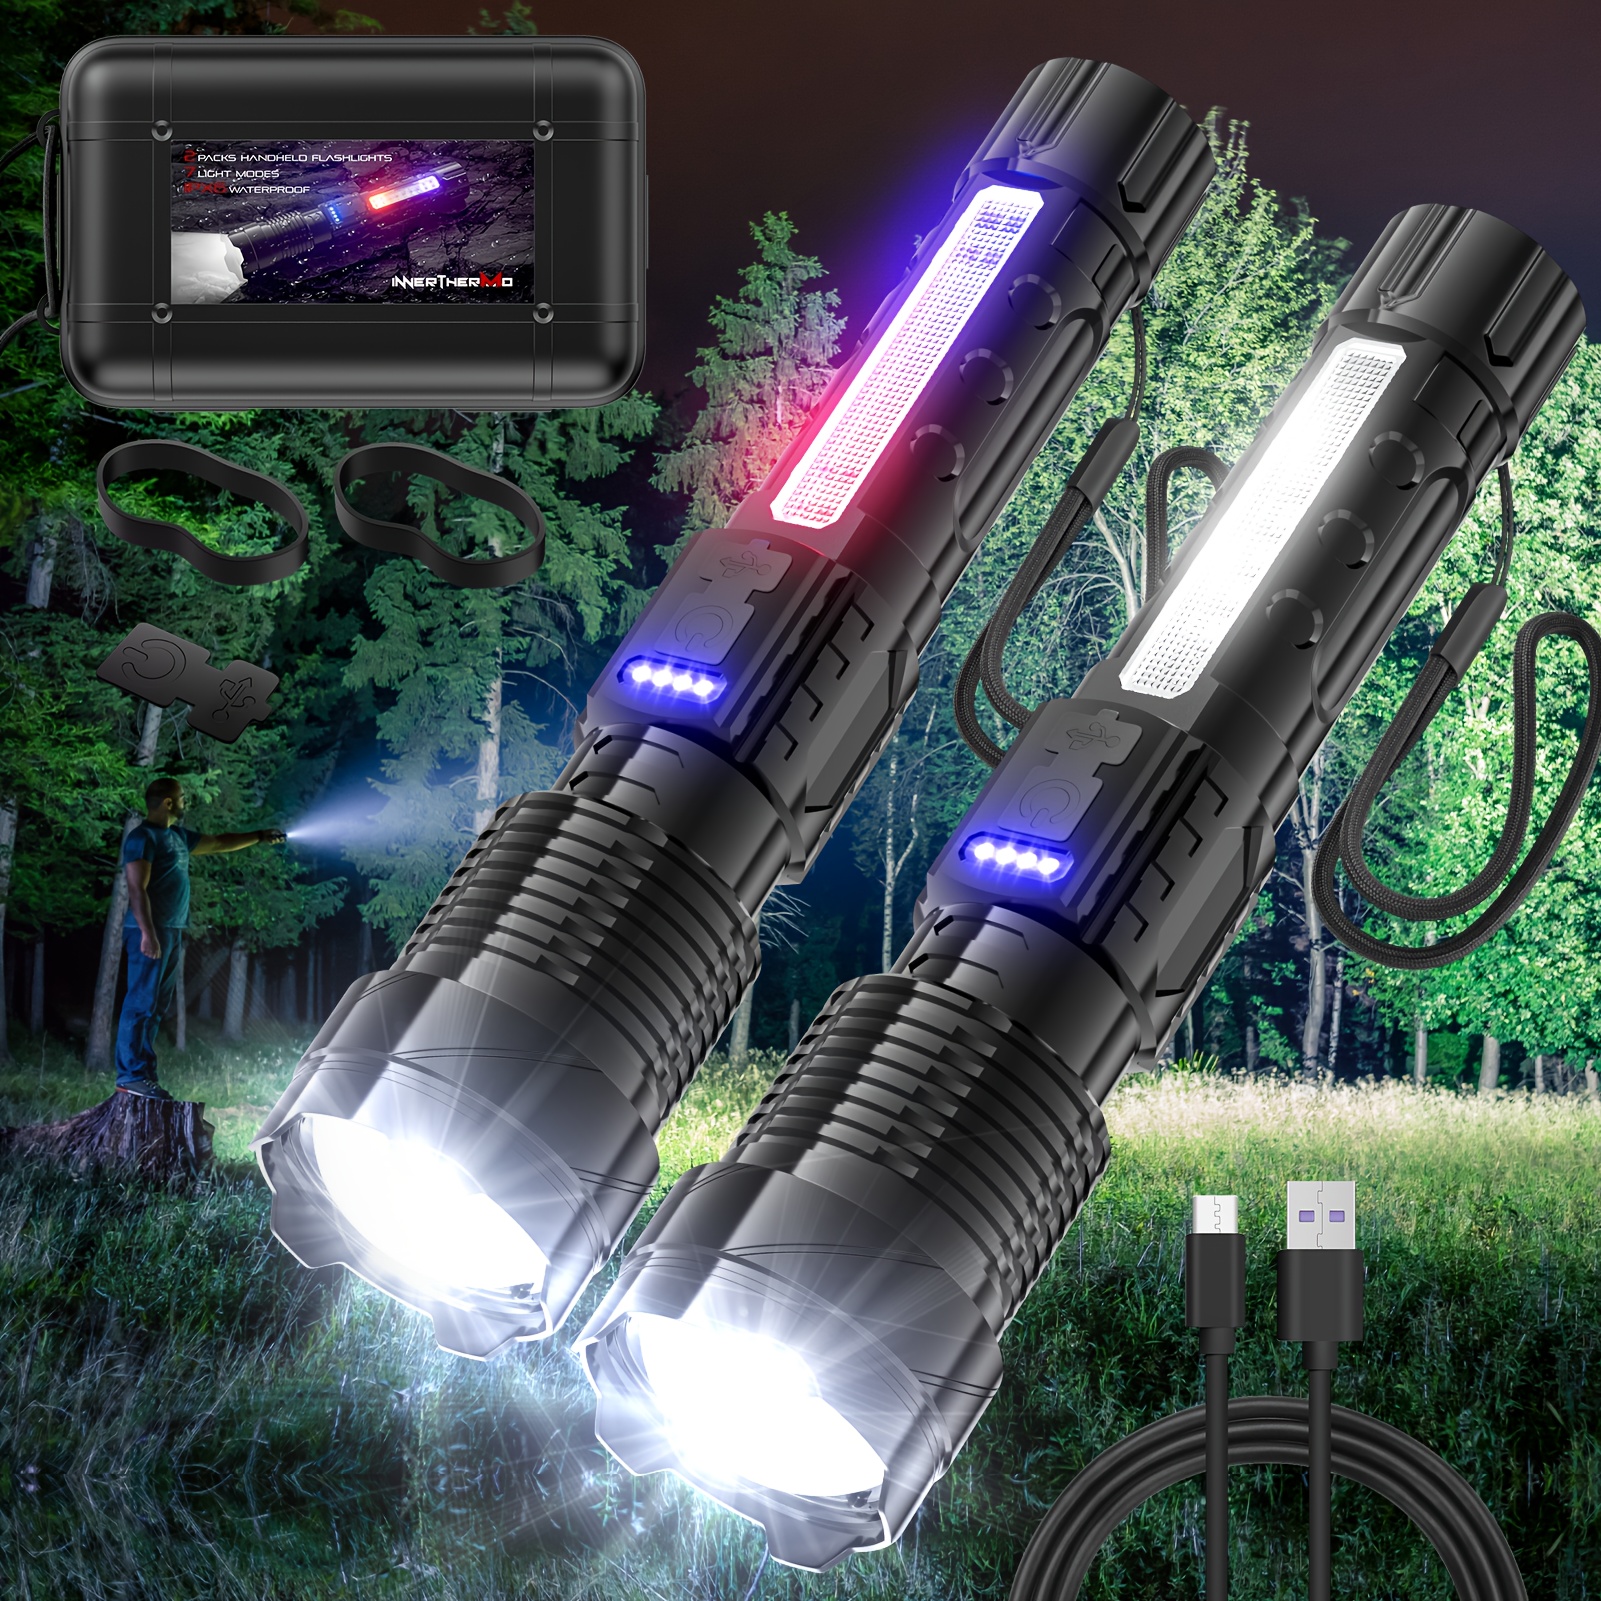 

Rechargeable Flashlights 2 Packs With 4000lm And 7 Light Modes, Multifunctional Tactical Led Flashlight With Cob Work Light, Power Display, Handheld Flash Light For Emergencies, Camping, Hiking